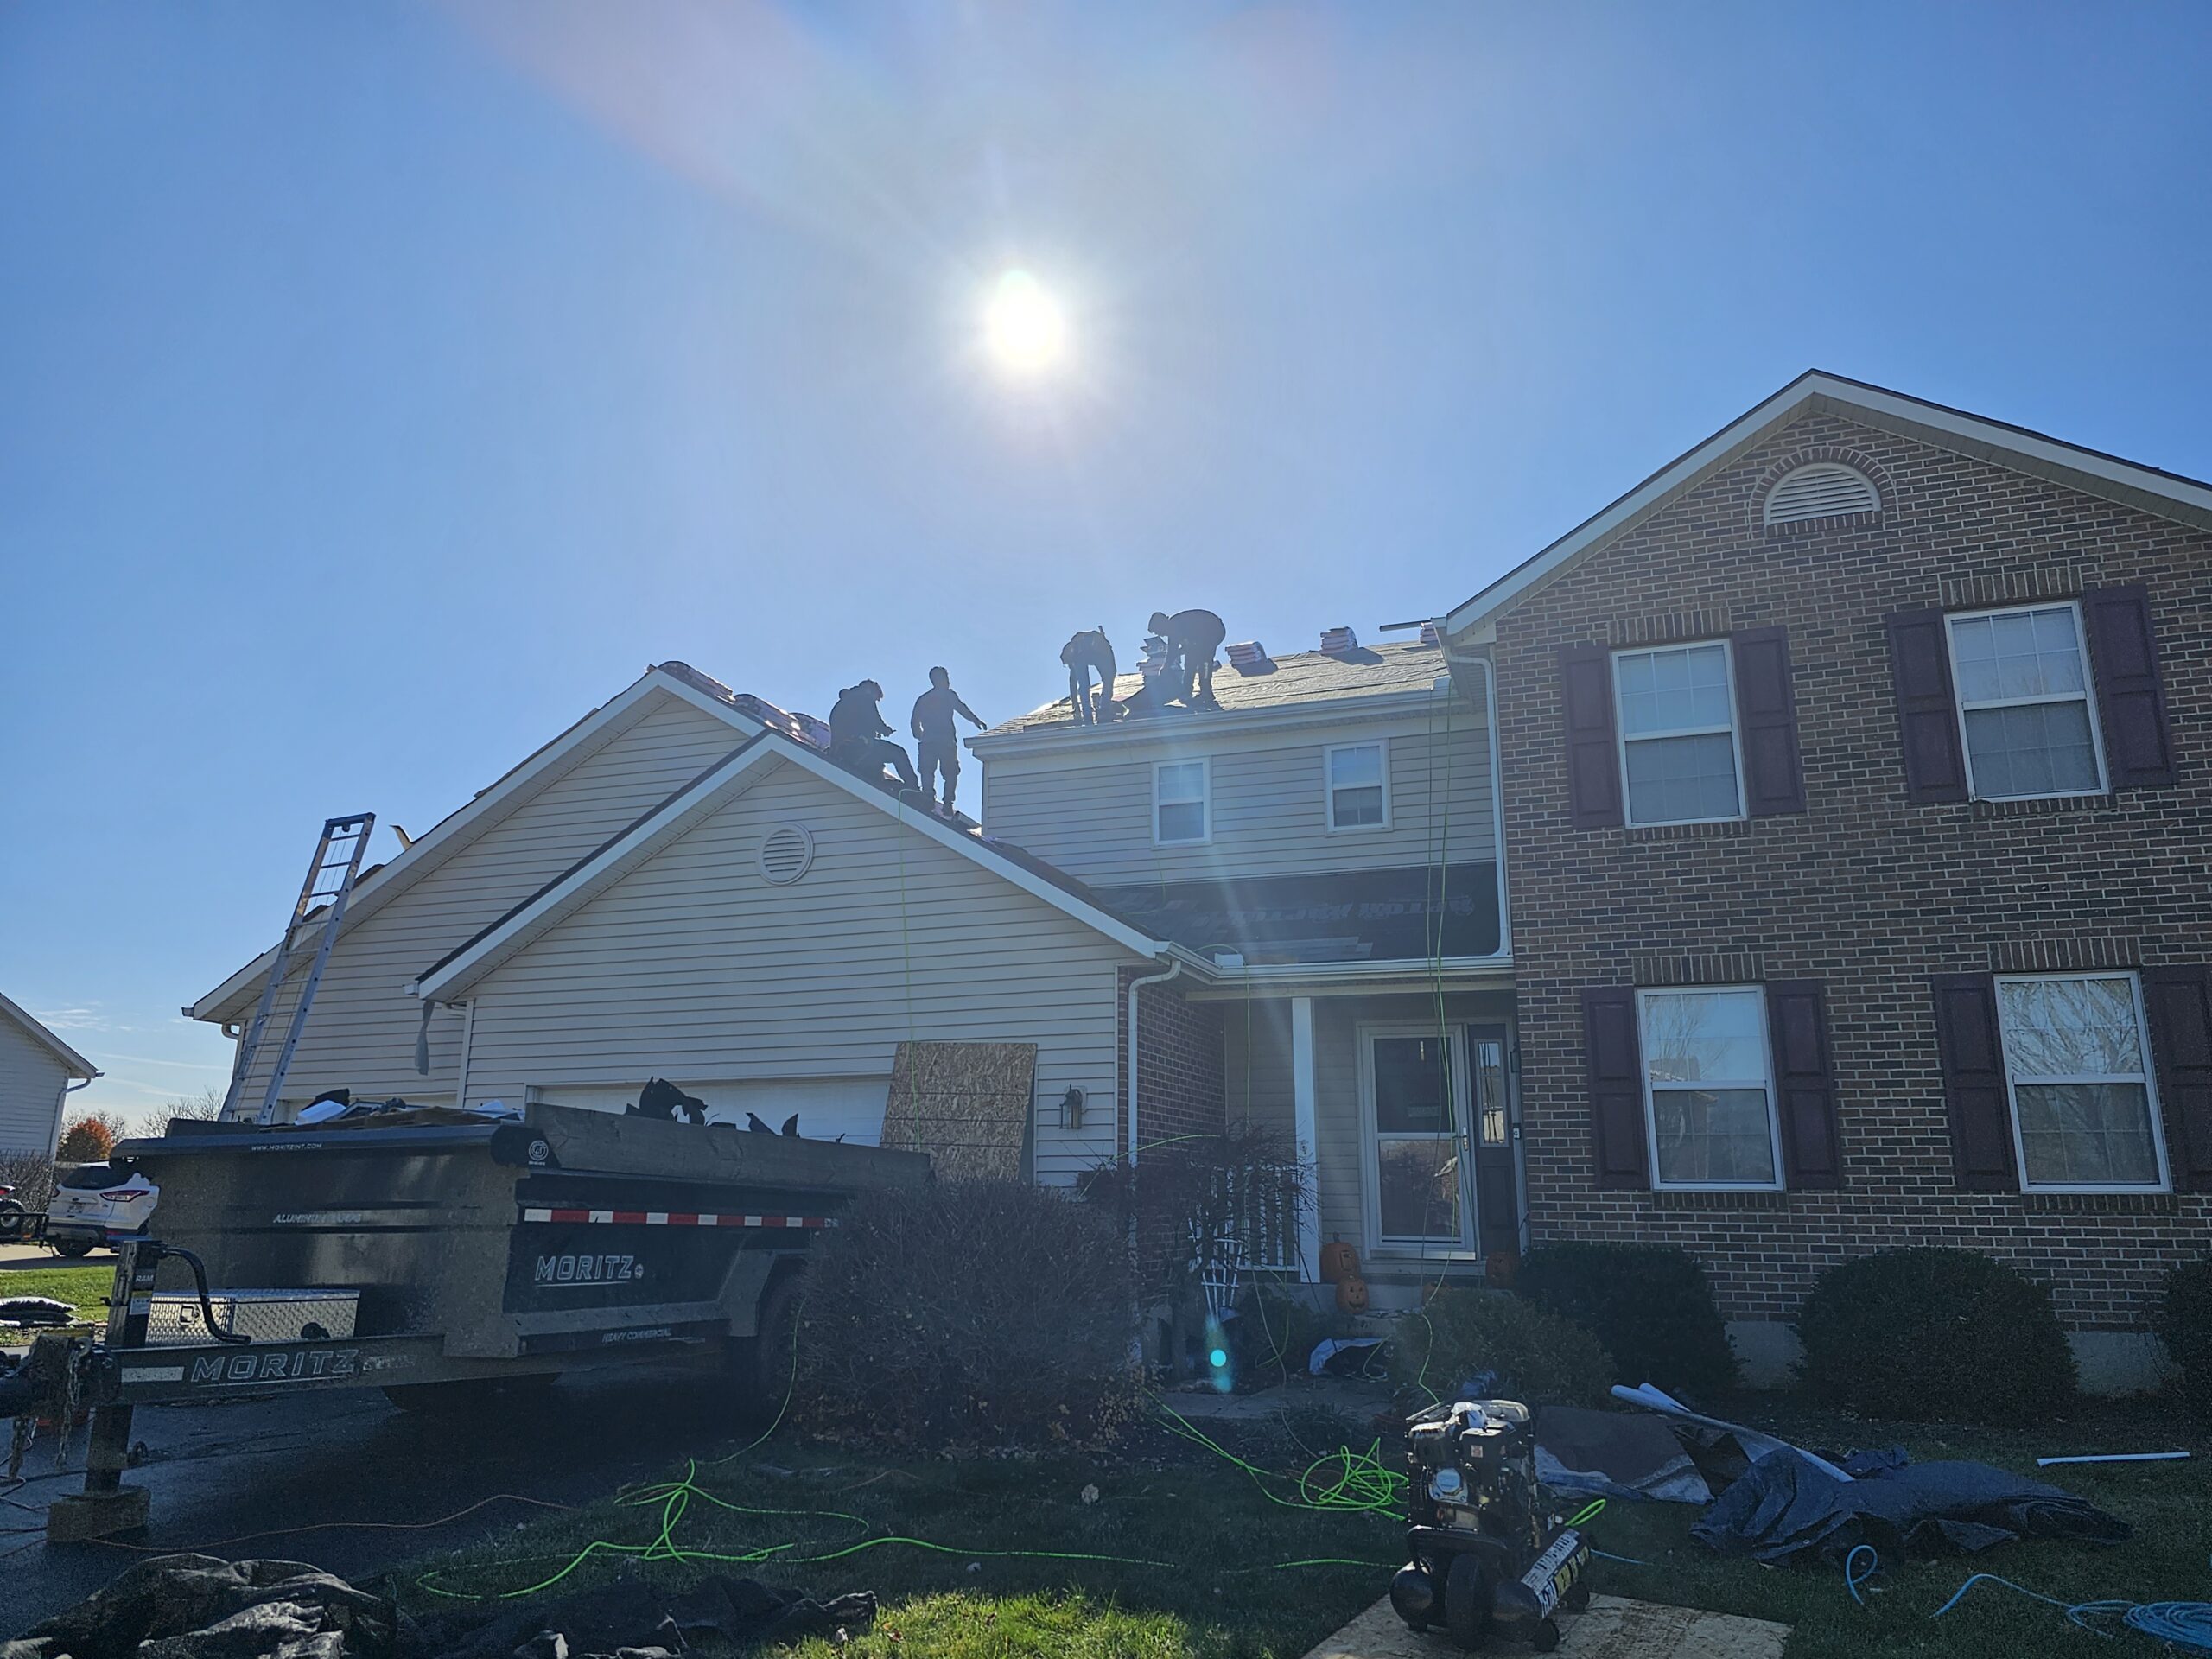 If you’re new here, we are a team of reliable roofing contractors located in Dayton, Ohio.